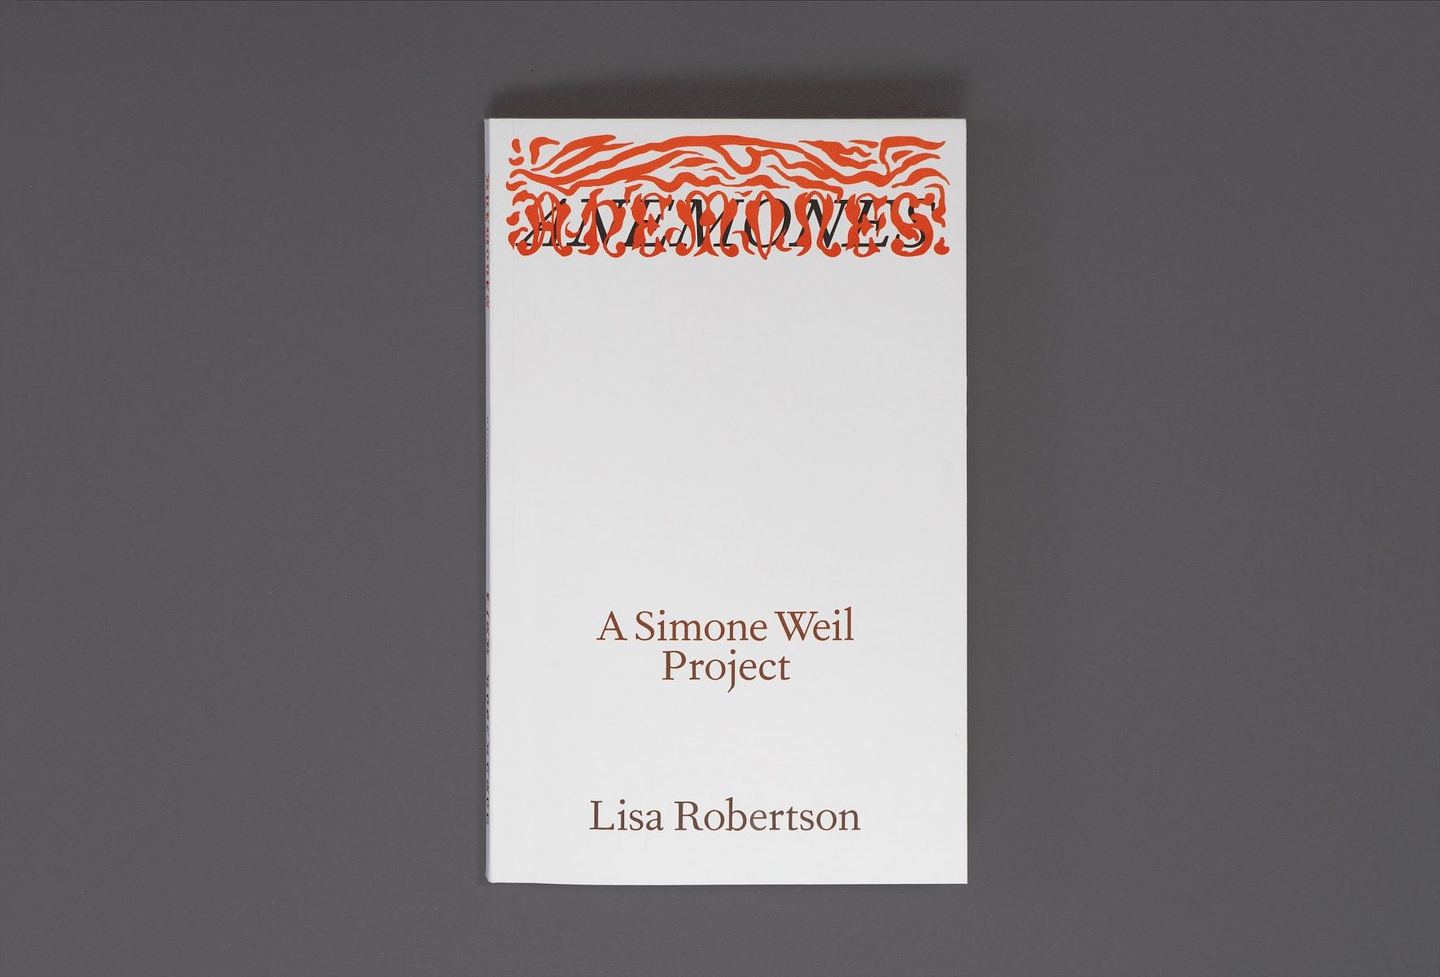 The cover of the book "Anemones: A Simone Weil Project" by Lisa Robertson.